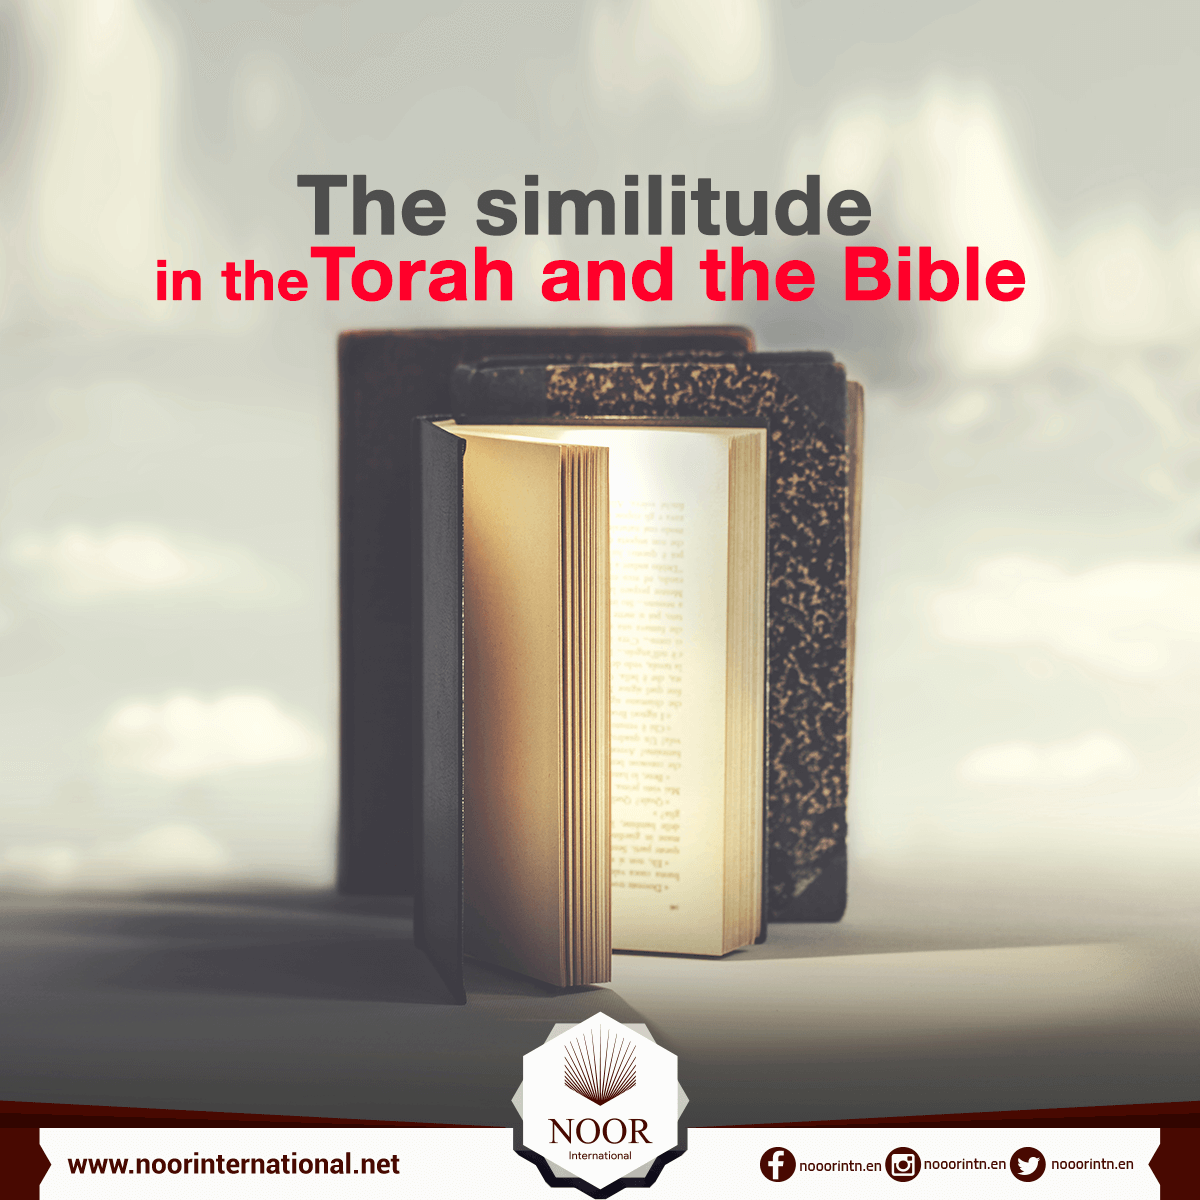 The similitude in the Torah and the Bible